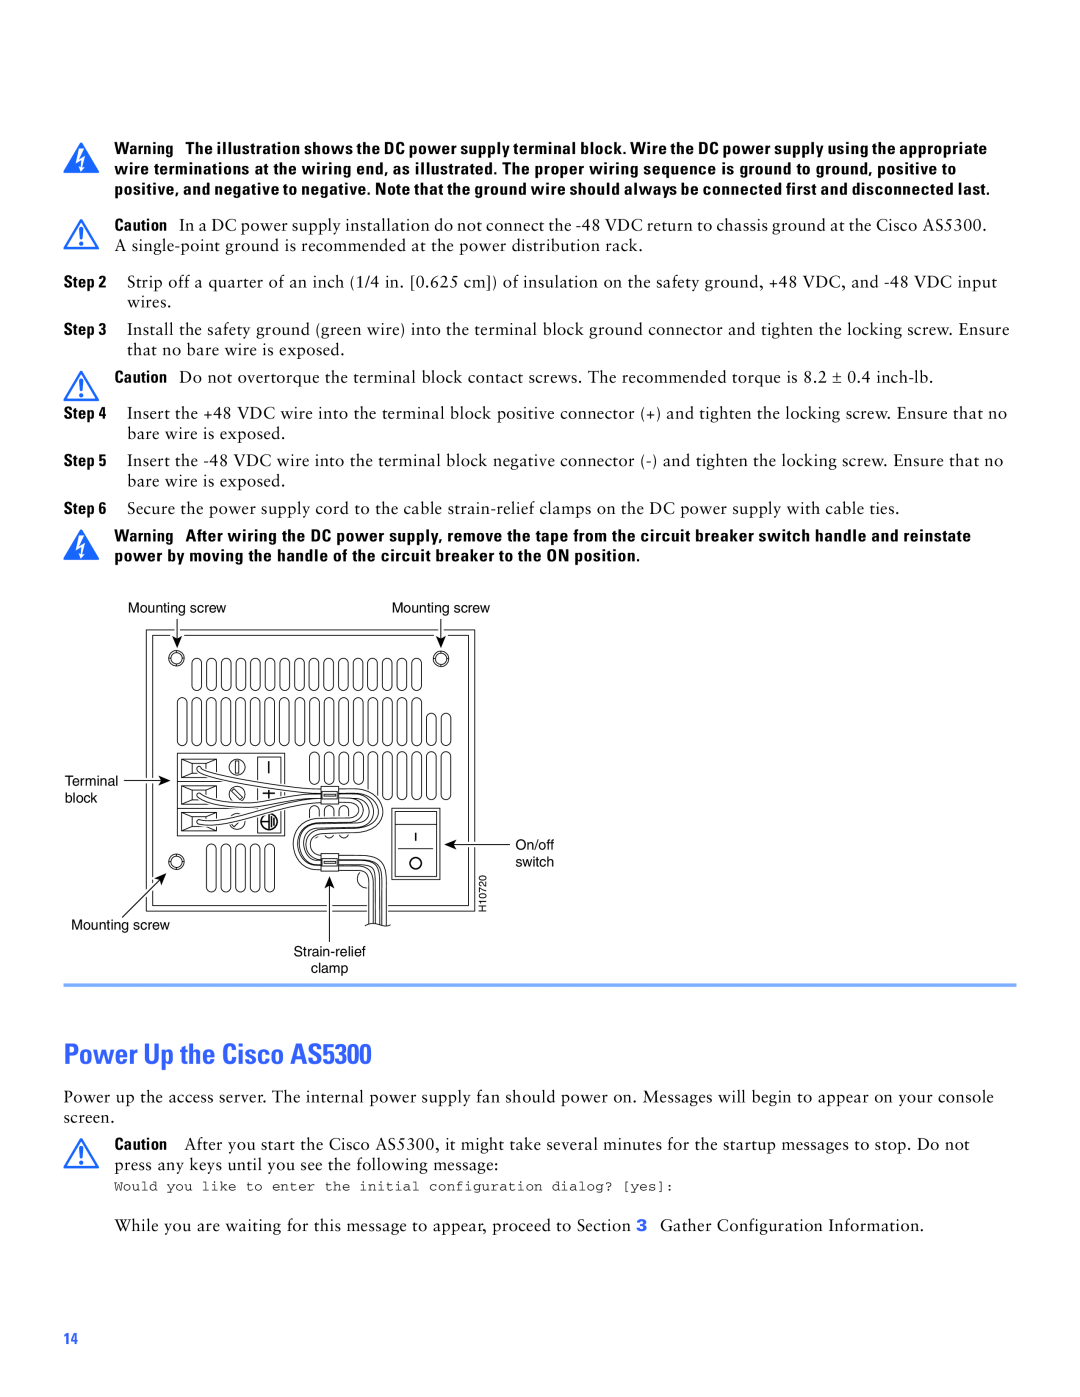 Cisco Systems manual Power Up the Cisco AS5300, Terminal, block, Mounting screw Strain-relief clamp, On/off switch 